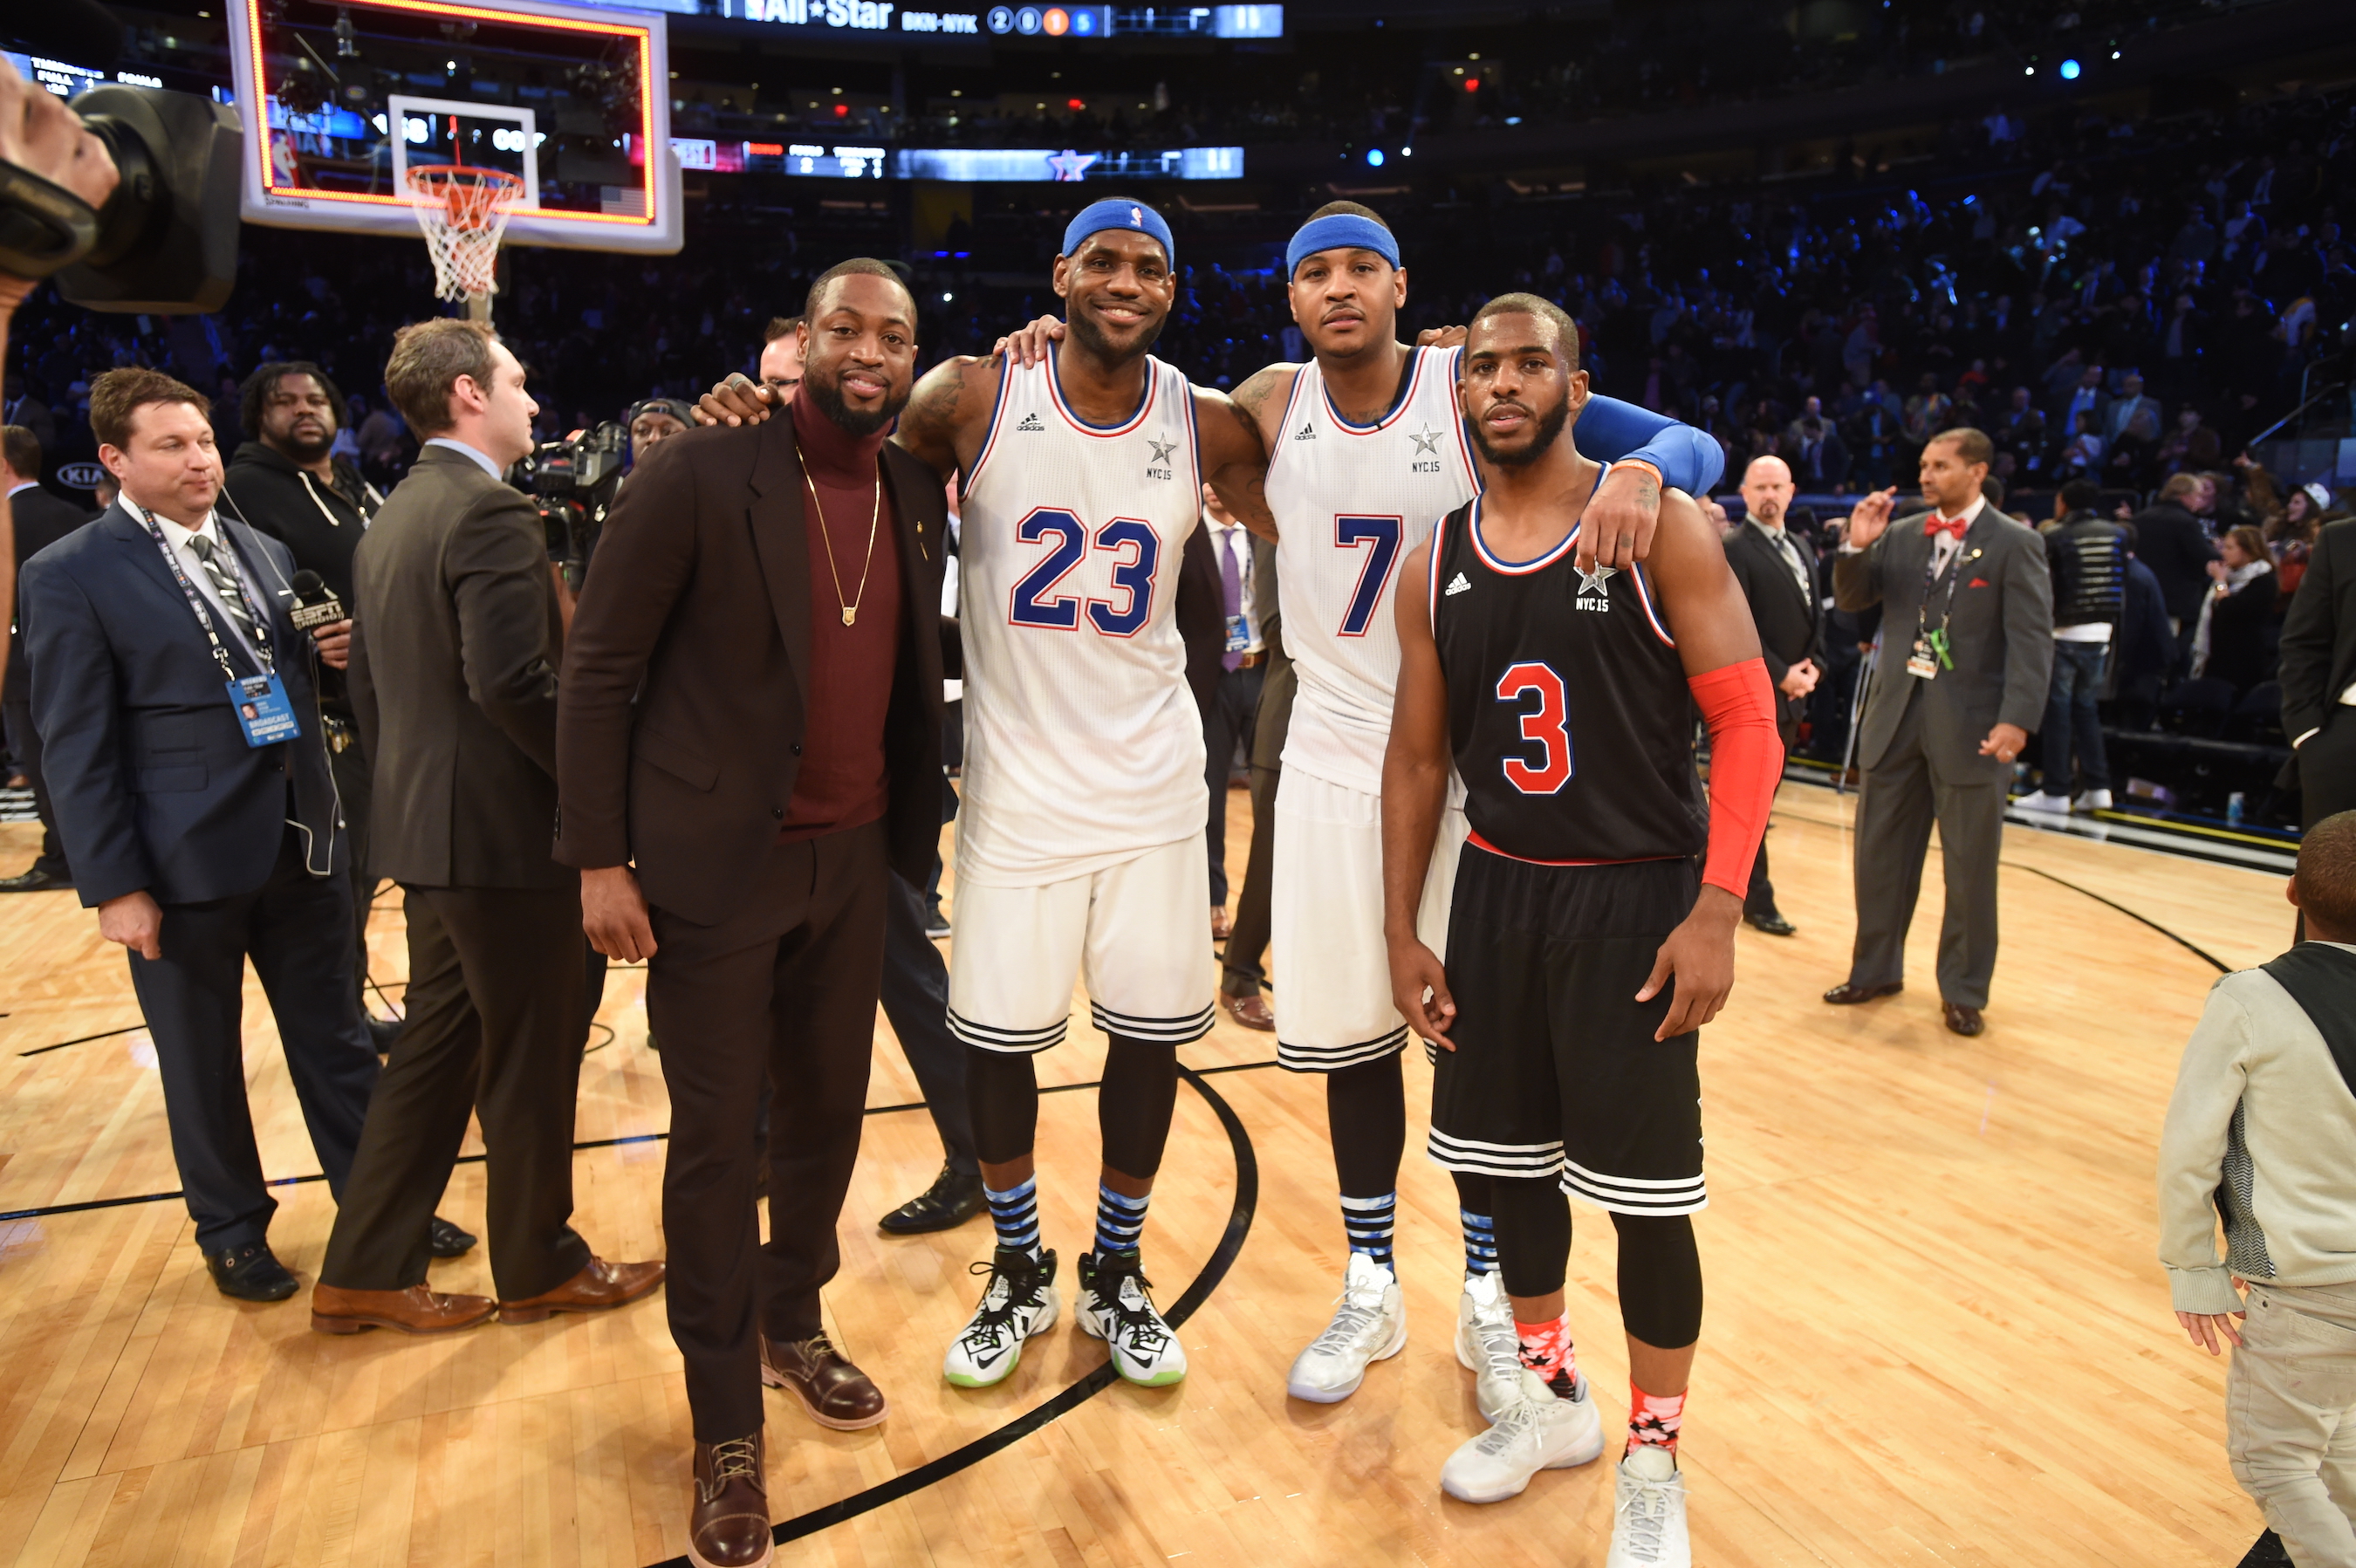 Dwyane Wade #3, LeBron James #23, Carmelo Anthony #7 of the Eastern Conference pose for a photo with Chris Paul #3 of the Western Conference after the 64th NBA All-Star Game presented by KIA as part of the 2015 NBA All-Star Weekend on February 15, 2015 at Madison Square Garden in New York, New York. NOTE TO USER: User expressly acknowledges and agrees that, by downloading and/or using this photograph, user is consenting to the terms and conditions of the Getty Images License Agreement.  Mandatory Copyright Notice: Copyright 2015 NBAE (Photo by Andrew D. Bernstein/NBAE via Getty Images)